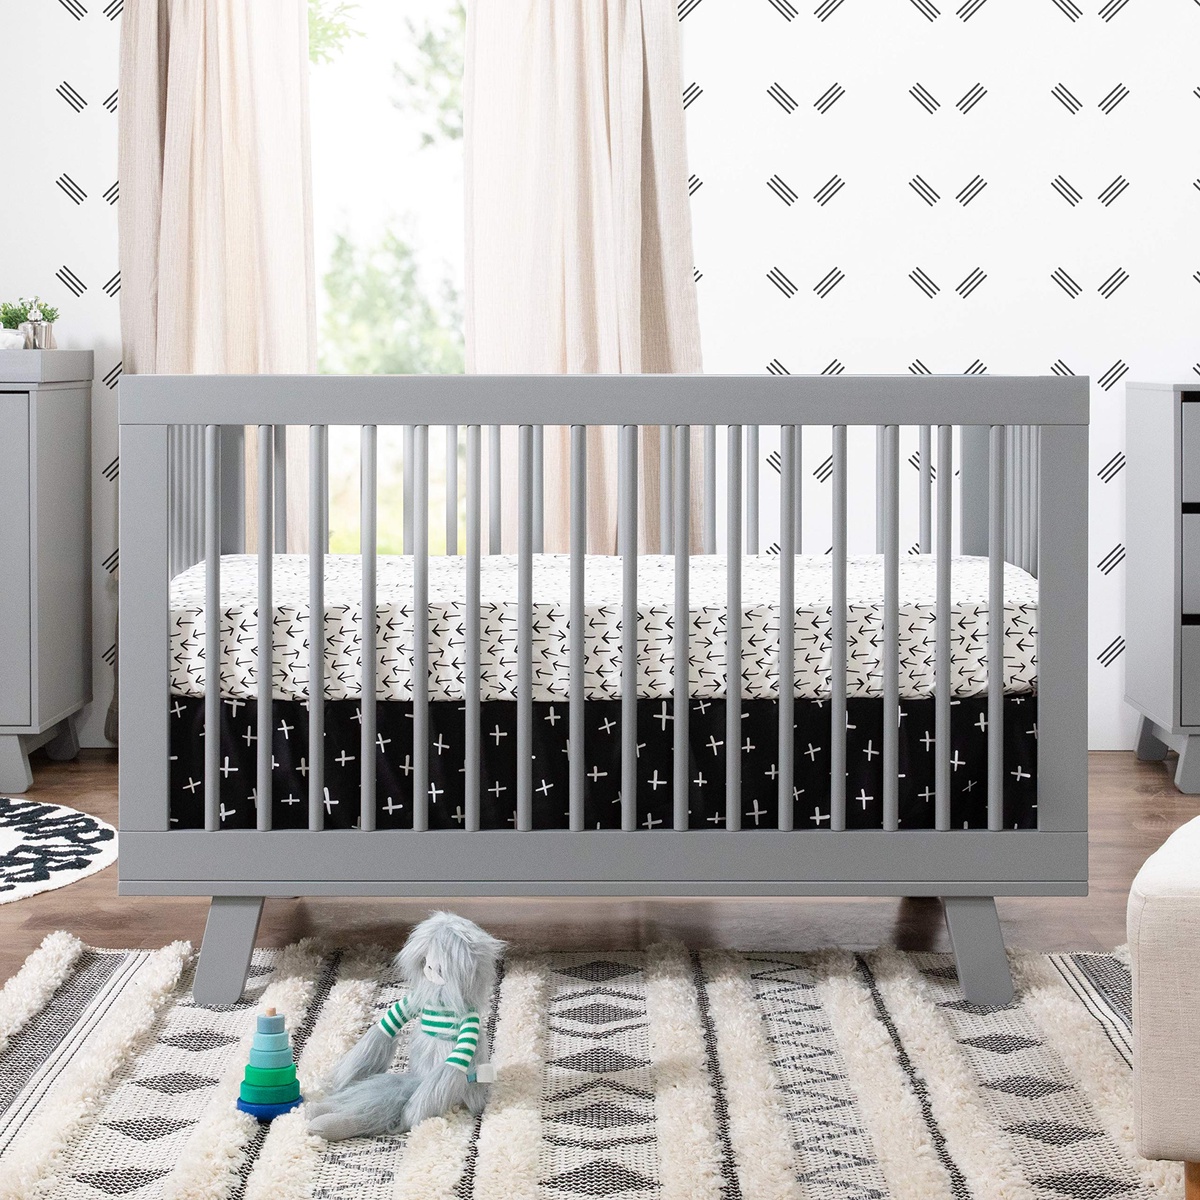 Creating a Cozy Haven for Your Little One with Babyletto Cribs